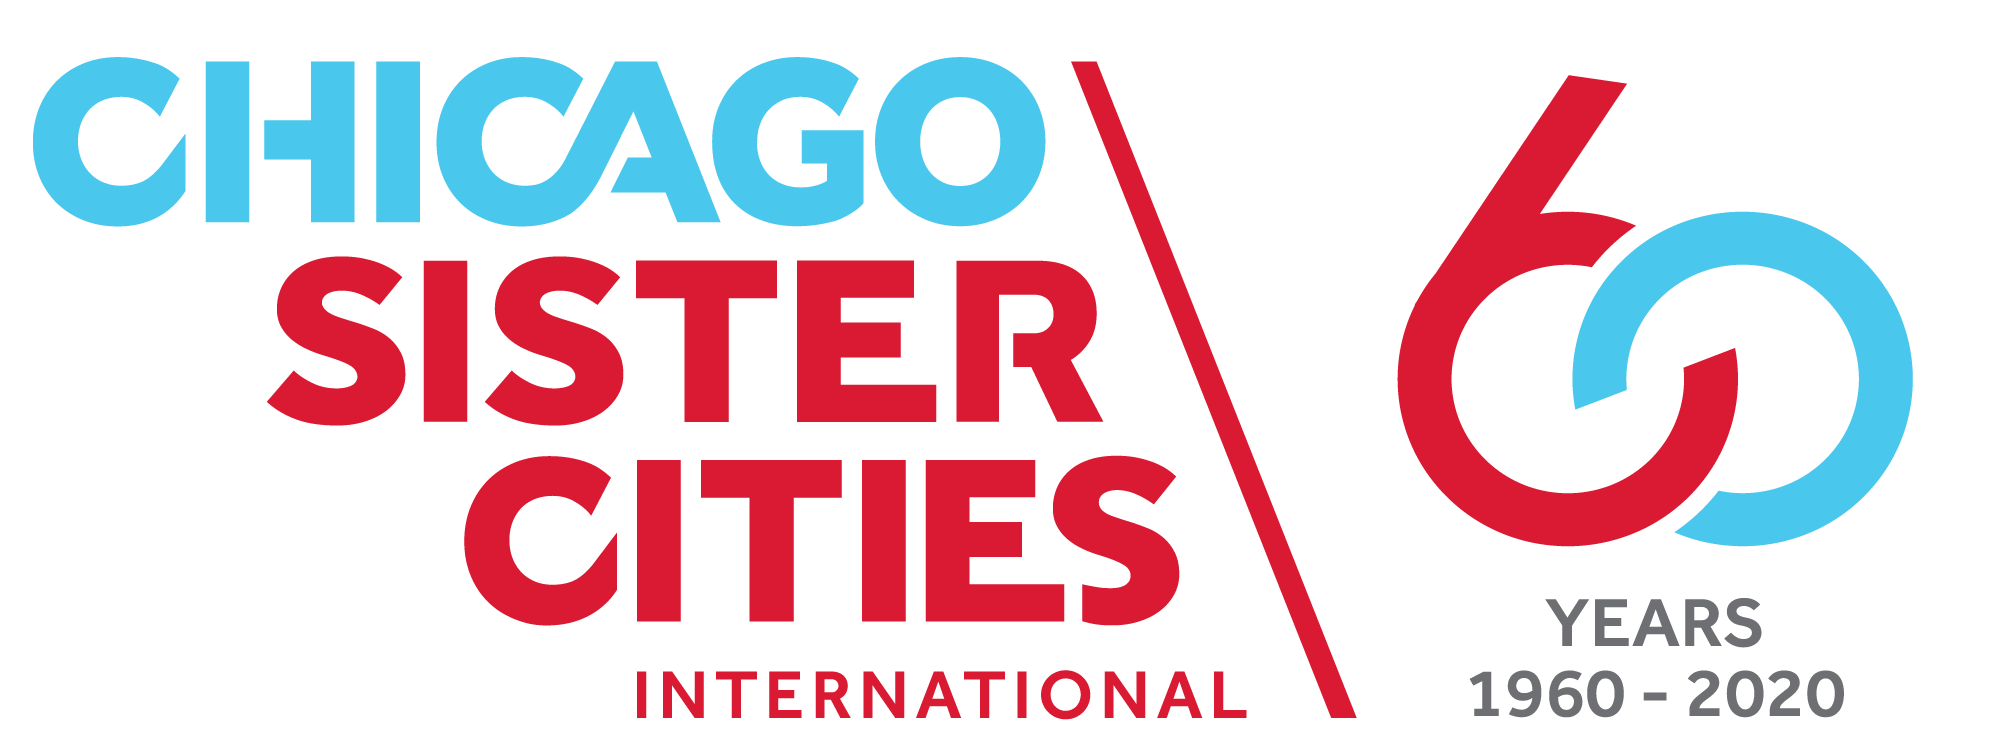 60th Anniversary Celebration Week - Chicago Sister Cities